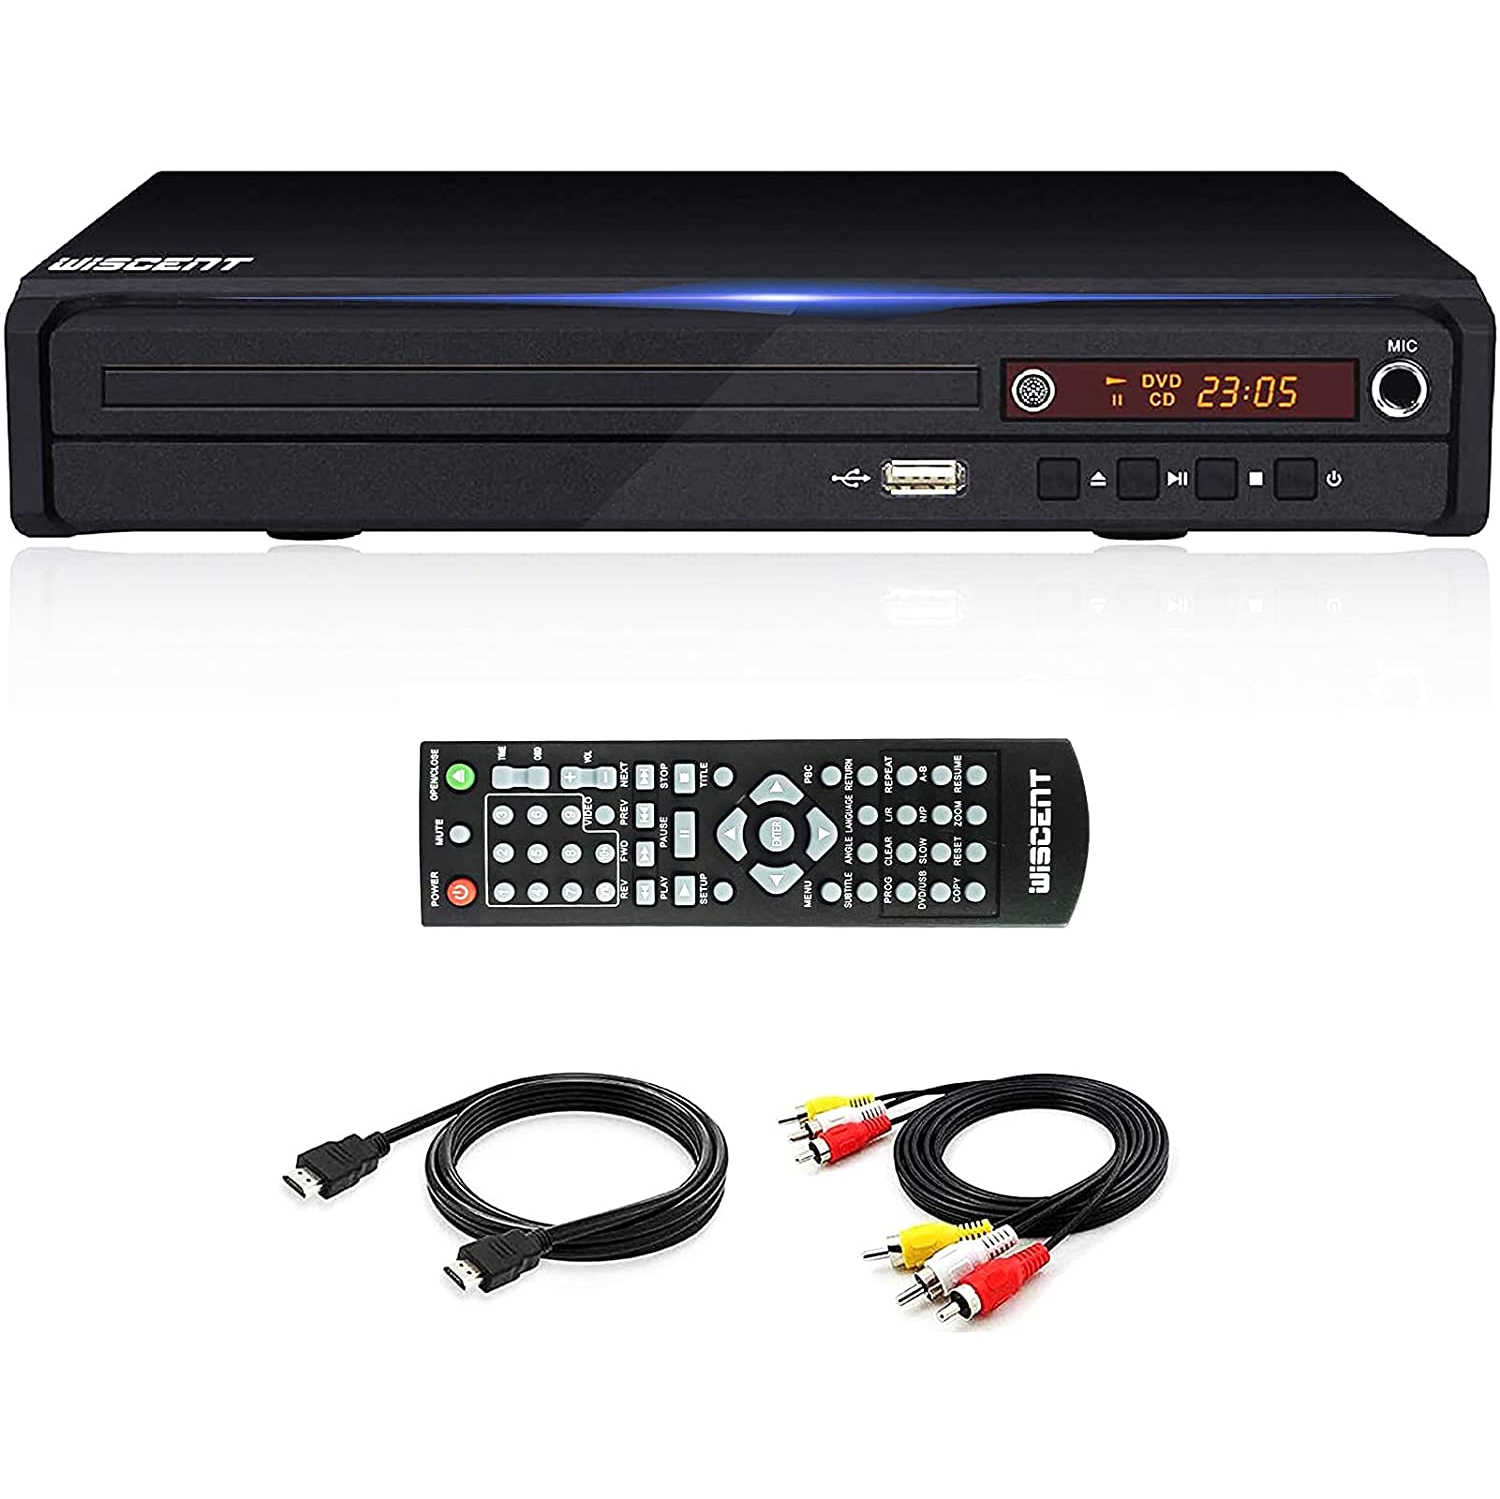 DVD Player for TV,with HDMI AV Output, Karaoke MIC, USB Input, Built-in PAL NTSC System, All Region Free, HD1080P DVD